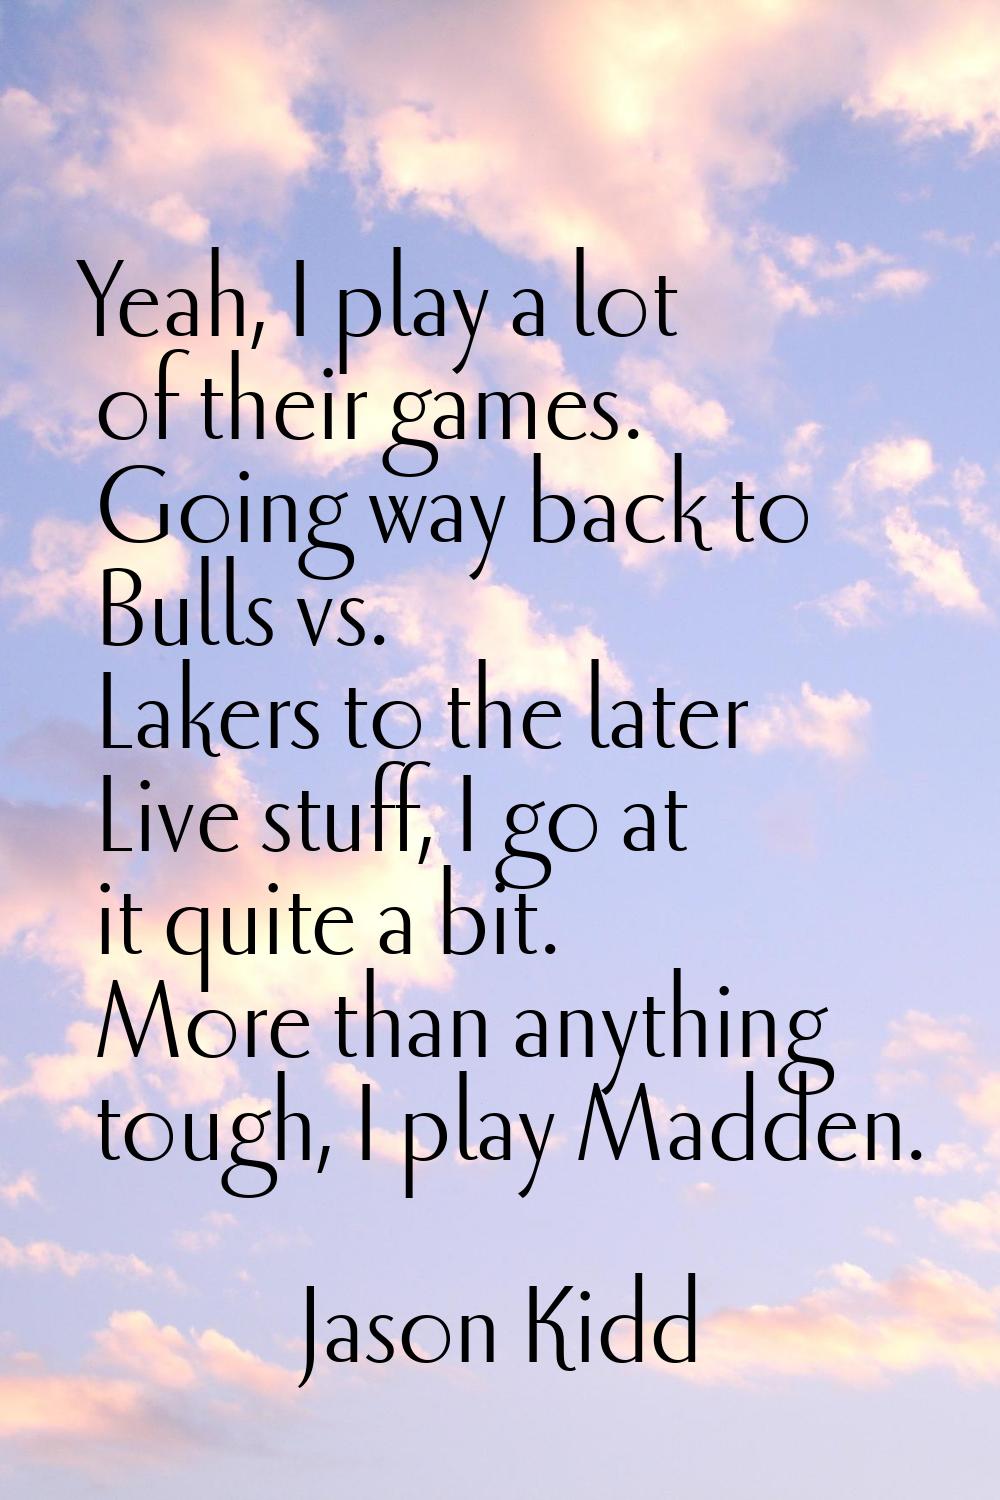 Yeah, I play a lot of their games. Going way back to Bulls vs. Lakers to the later Live stuff, I go